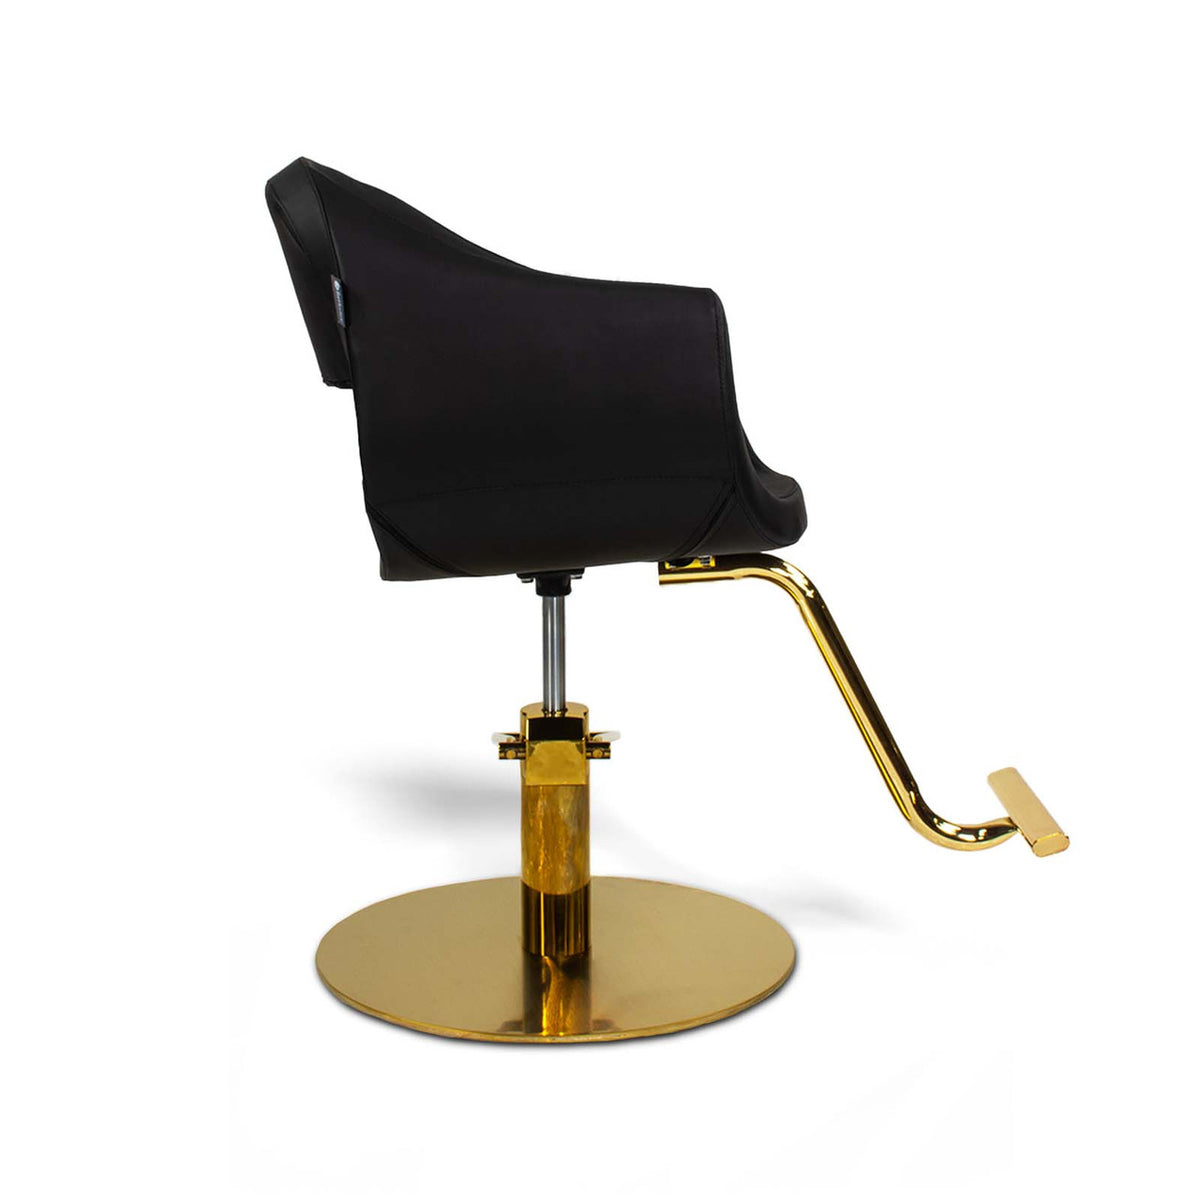 Berkeley - Milla Styling Chair with Gold Pump